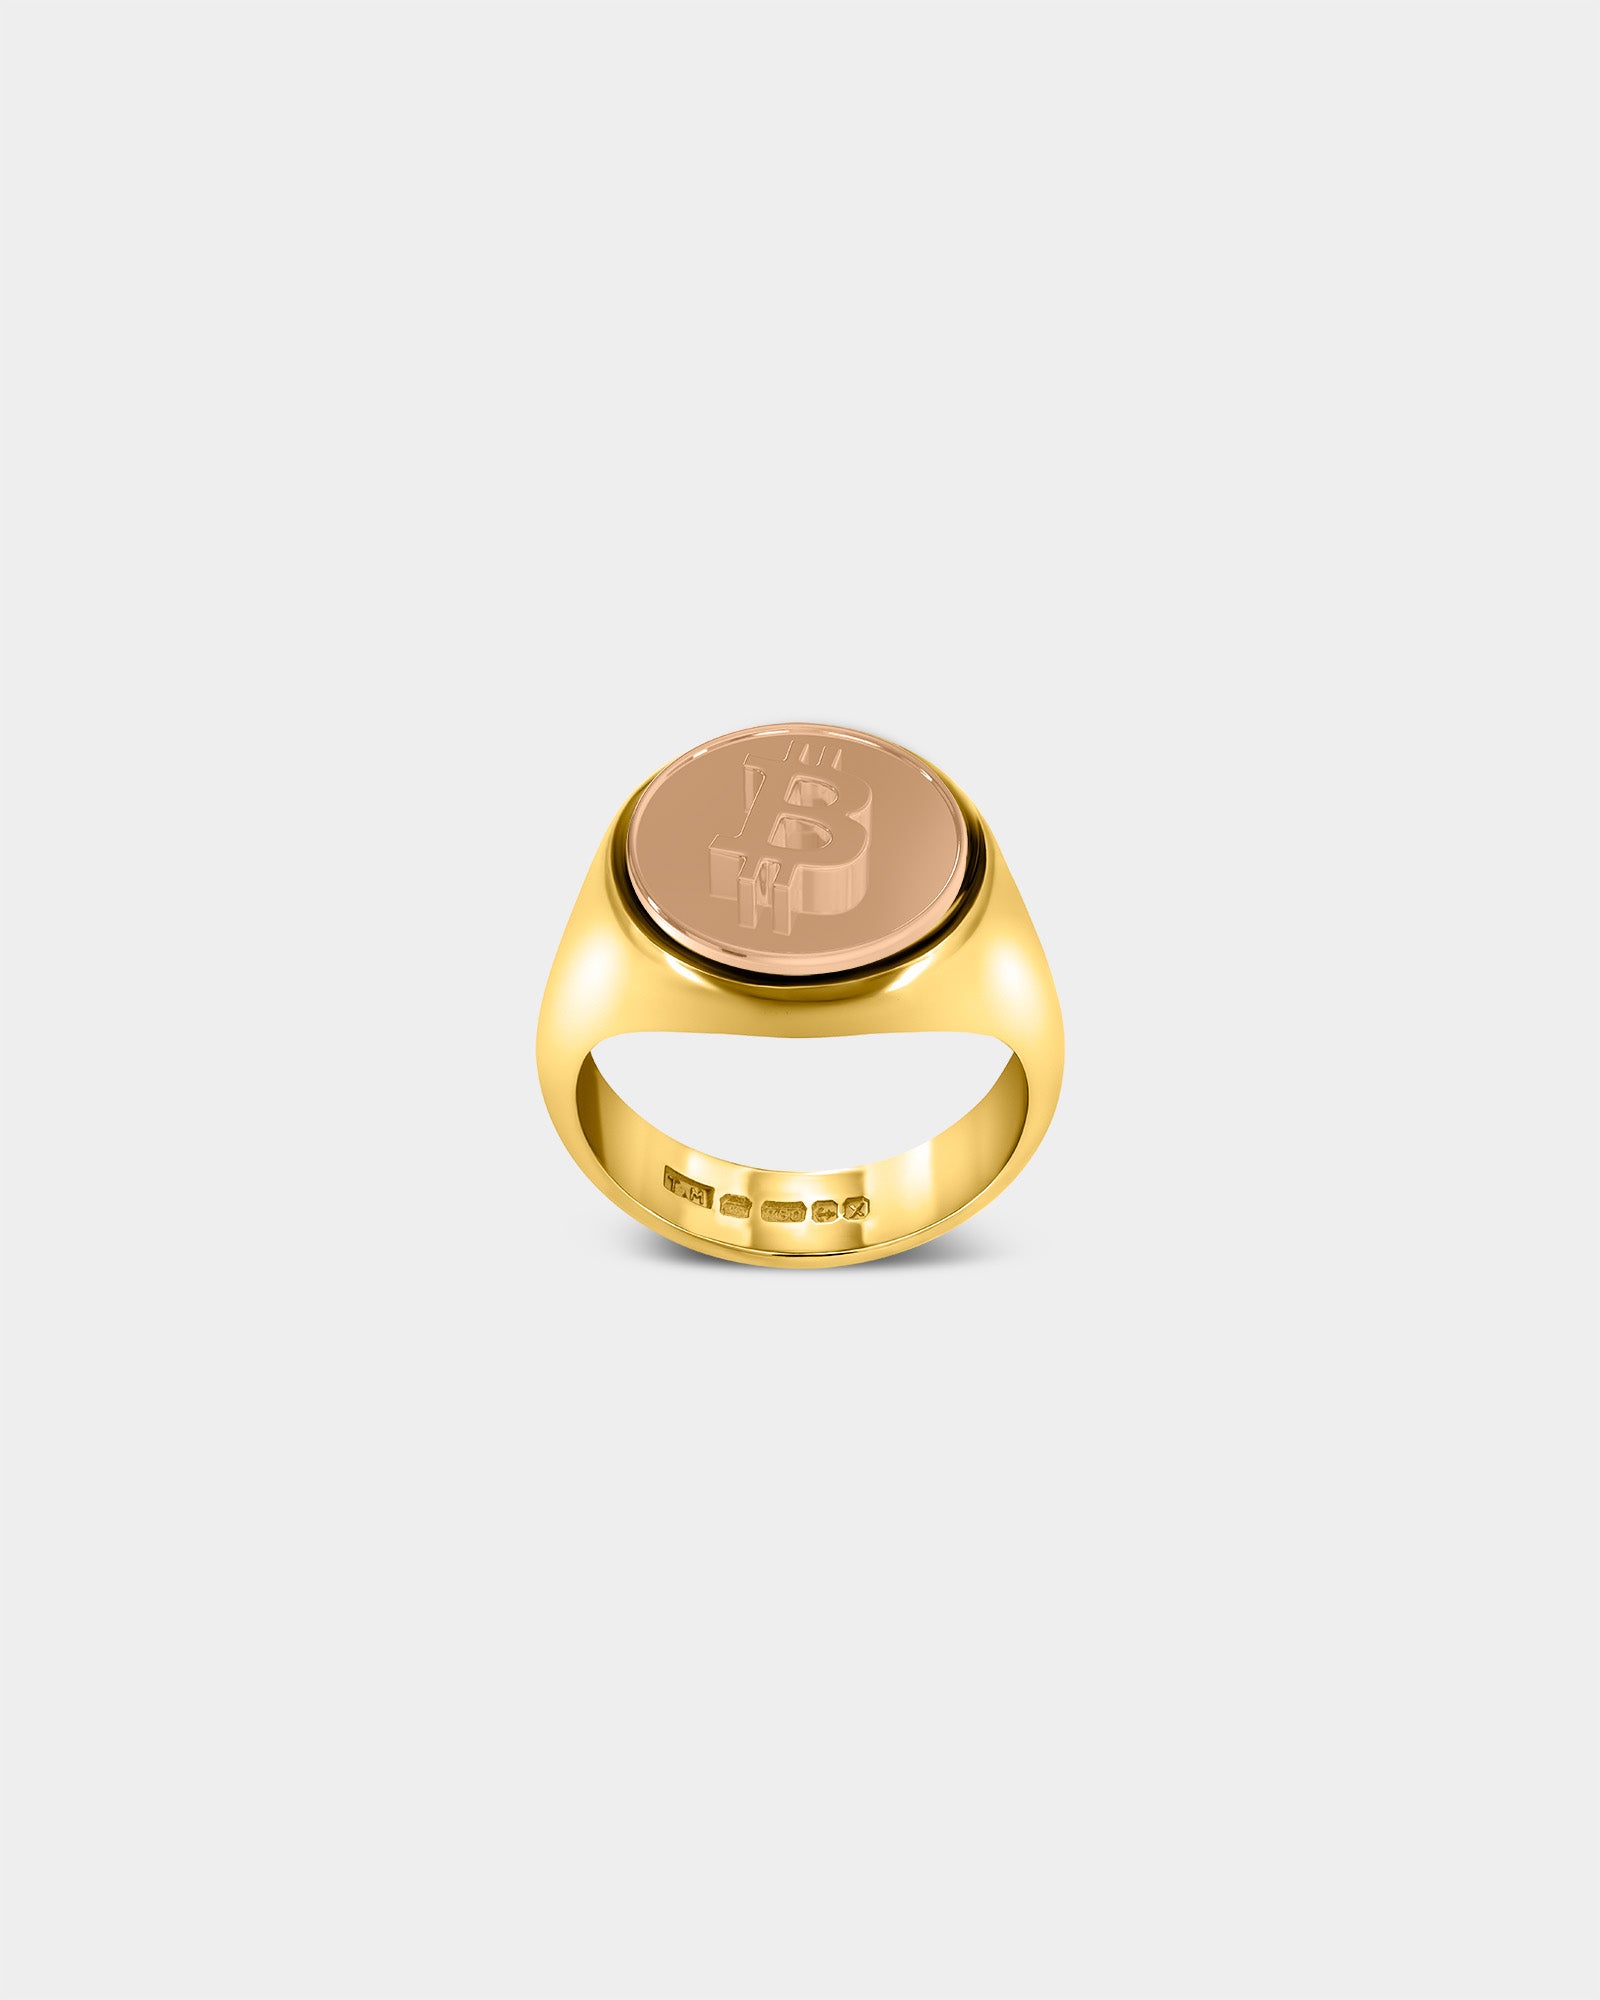 Large Bitcoin Crypto Ring in 9k Yellow Gold / 9k Rose Gold by Wilson Grant